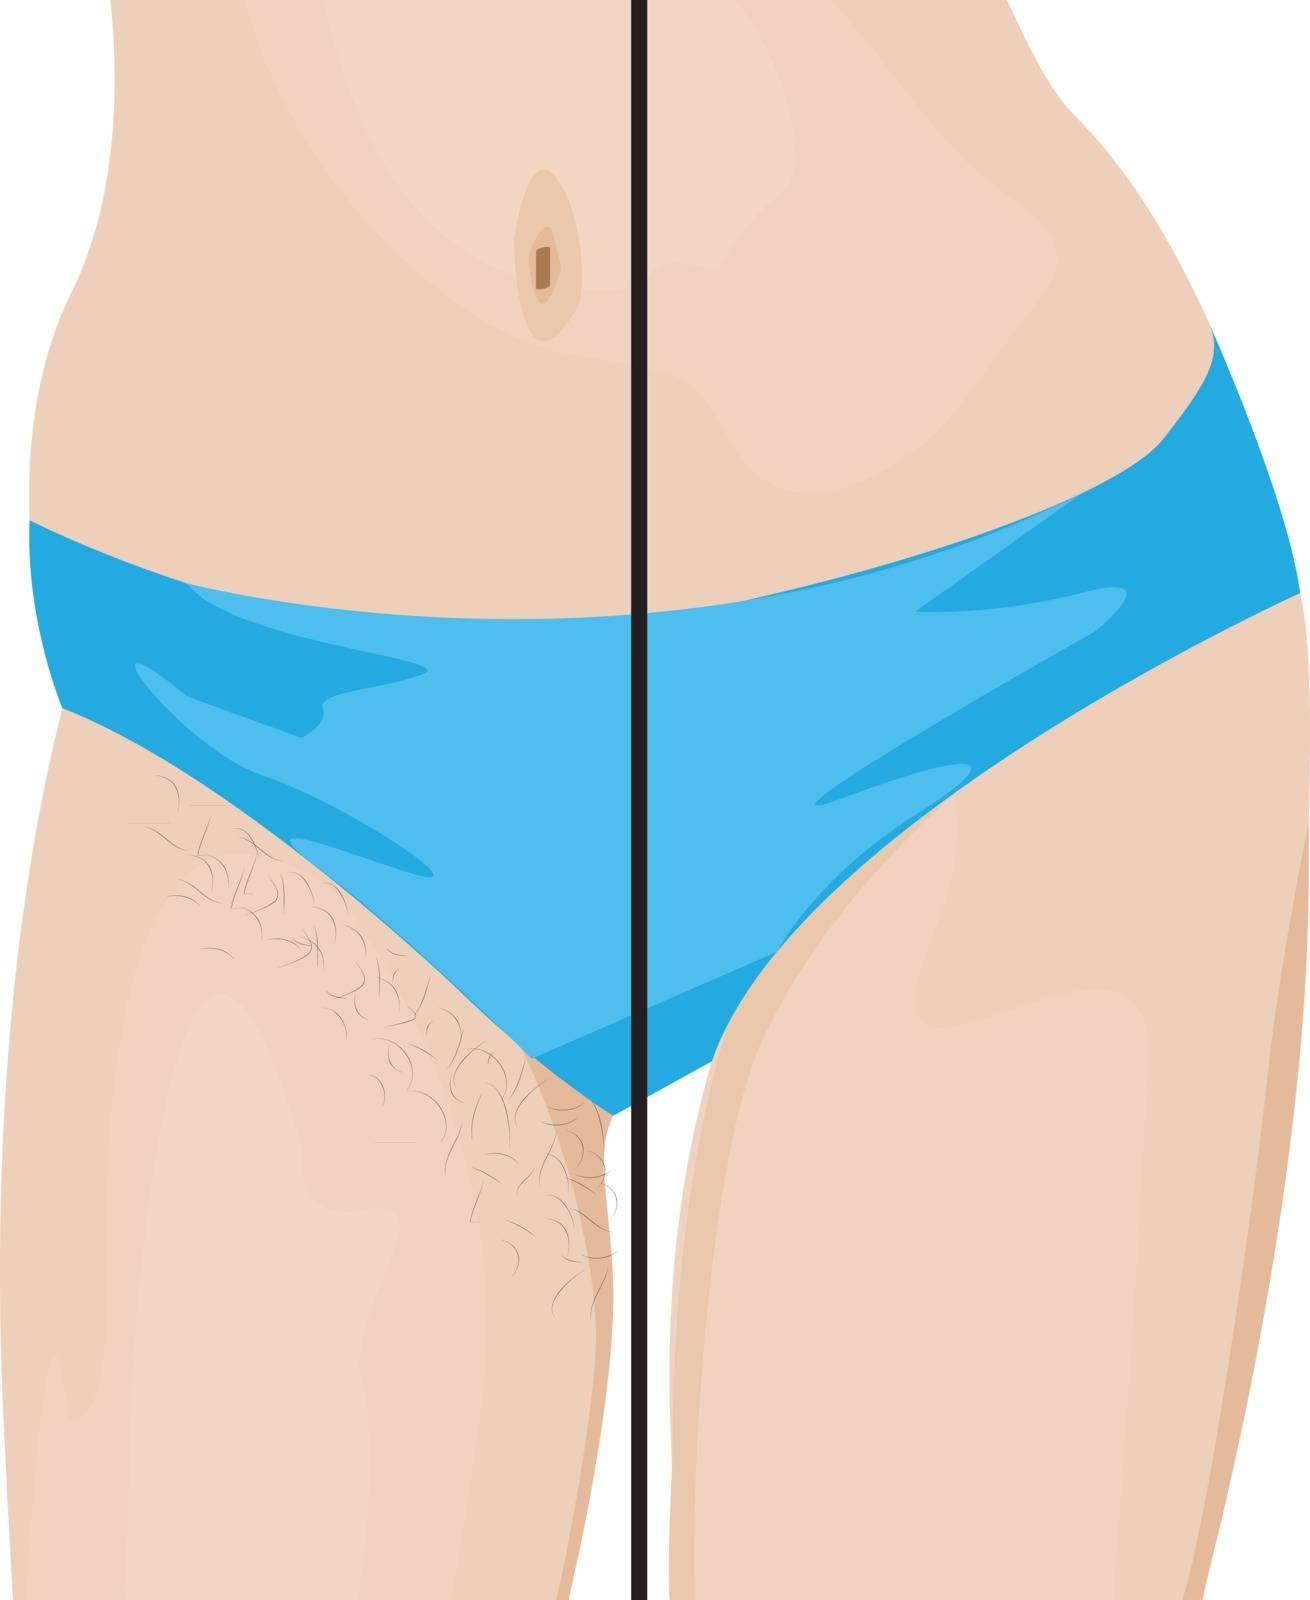 Hair removal results. Before and after. vector illustration by Olena758